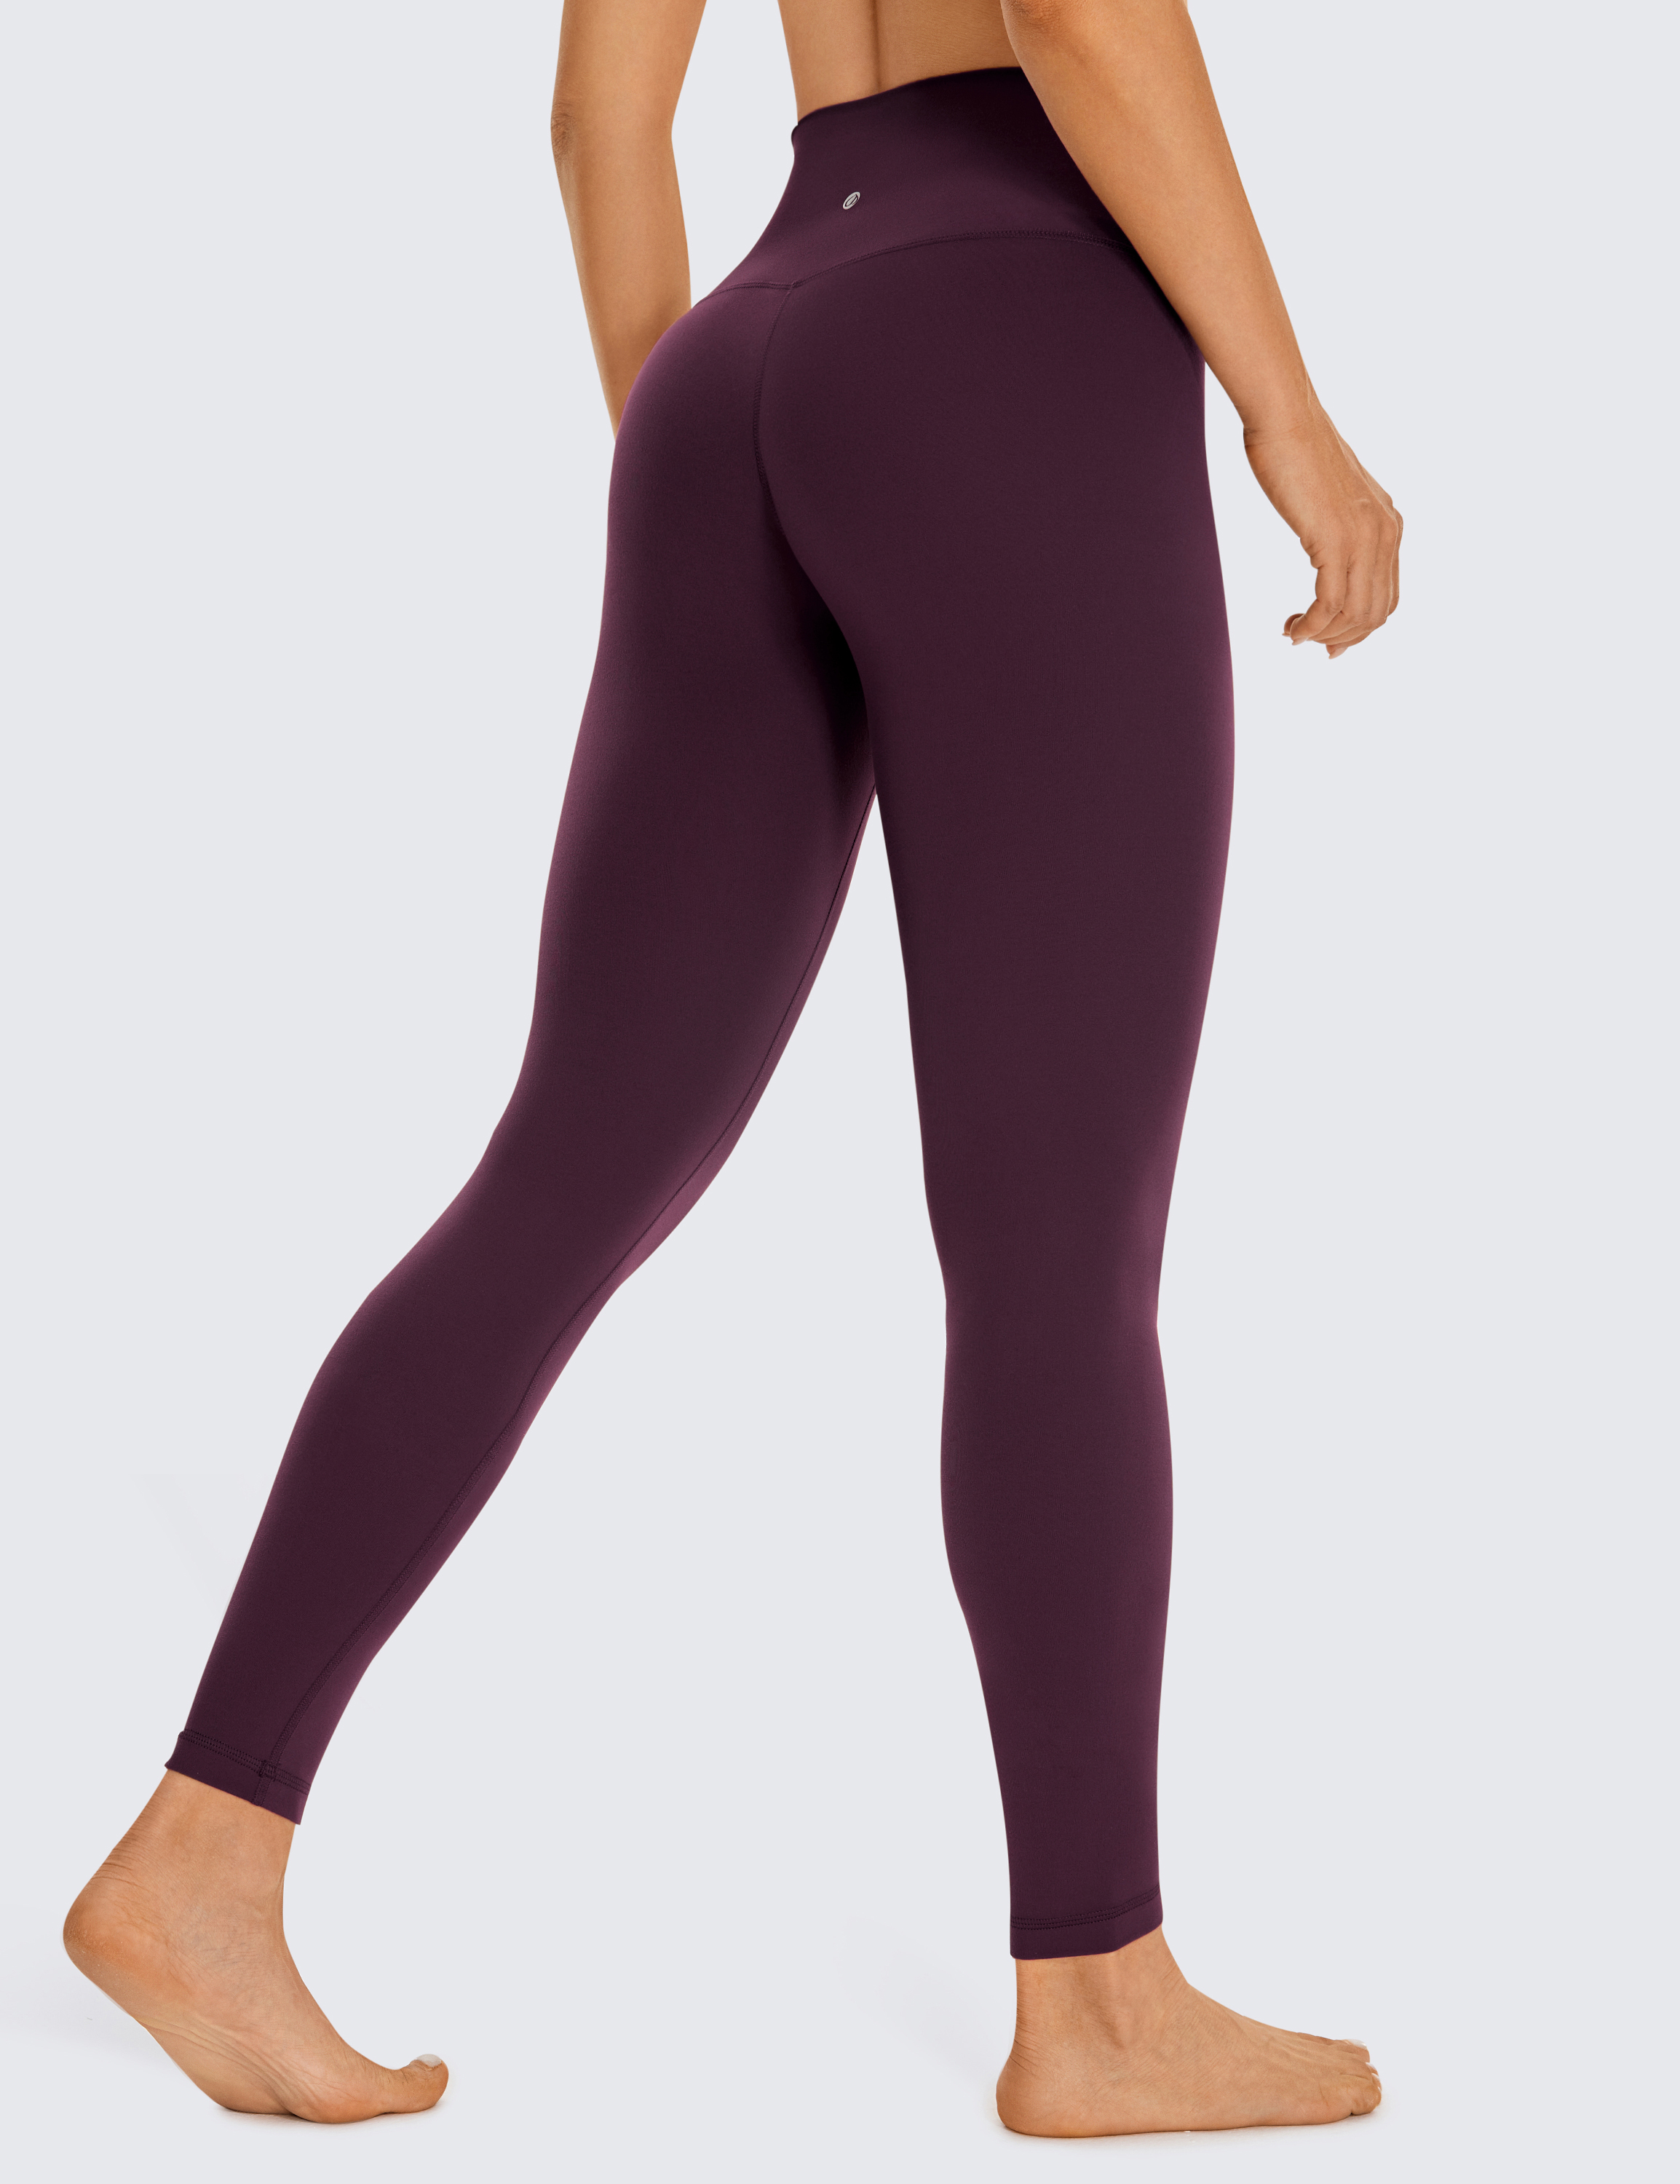 CRZ YOGA Butterluxe Womens High Waisted Legging 28 Inches Workout